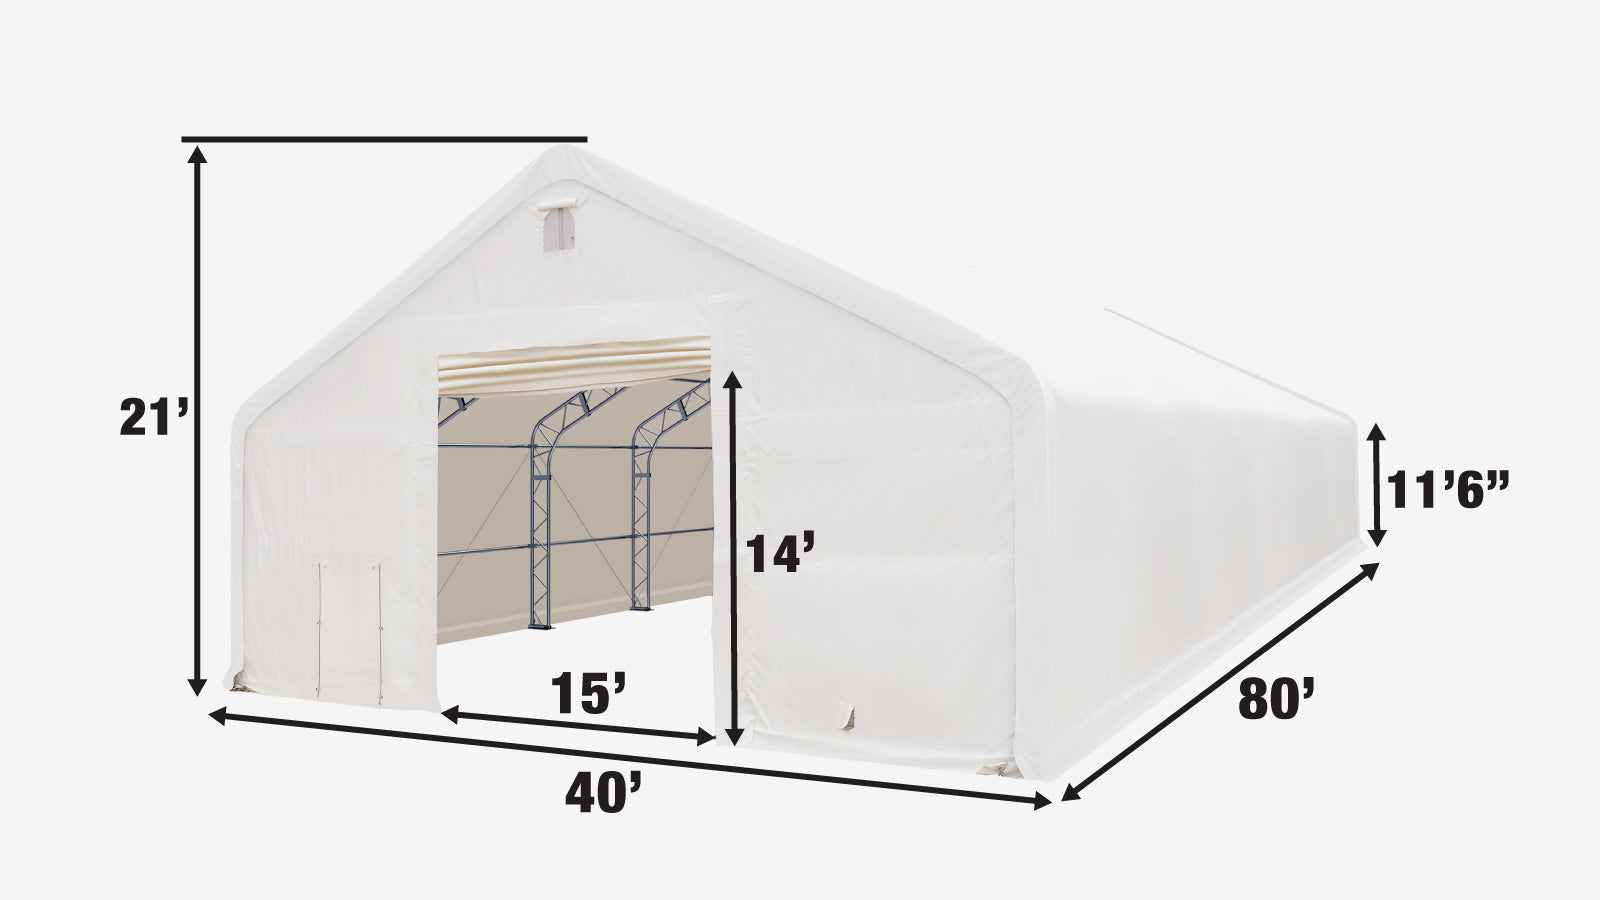 TMG Industrial 40' x 80' Dual Truss Storage Shelter with Heavy Duty 21 oz PVC Cover & Drive Through Doors, TMG-DT4081 (Previously DT4080)-specifications-image